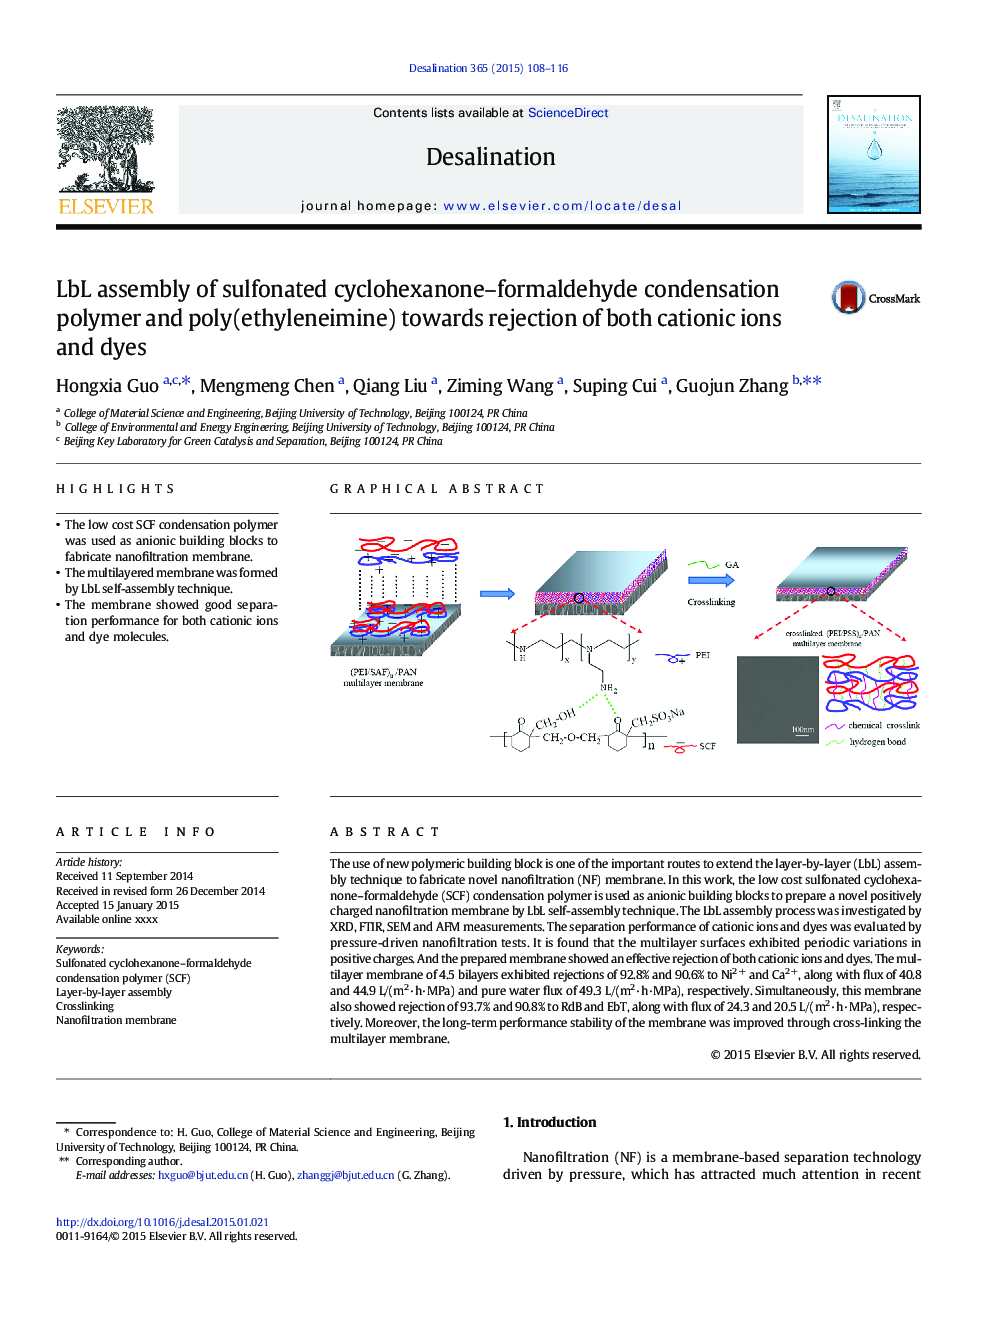 LbL assembly of sulfonated cyclohexanone-formaldehyde condensation polymer and poly(ethyleneimine) towards rejection of both cationic ions and dyes